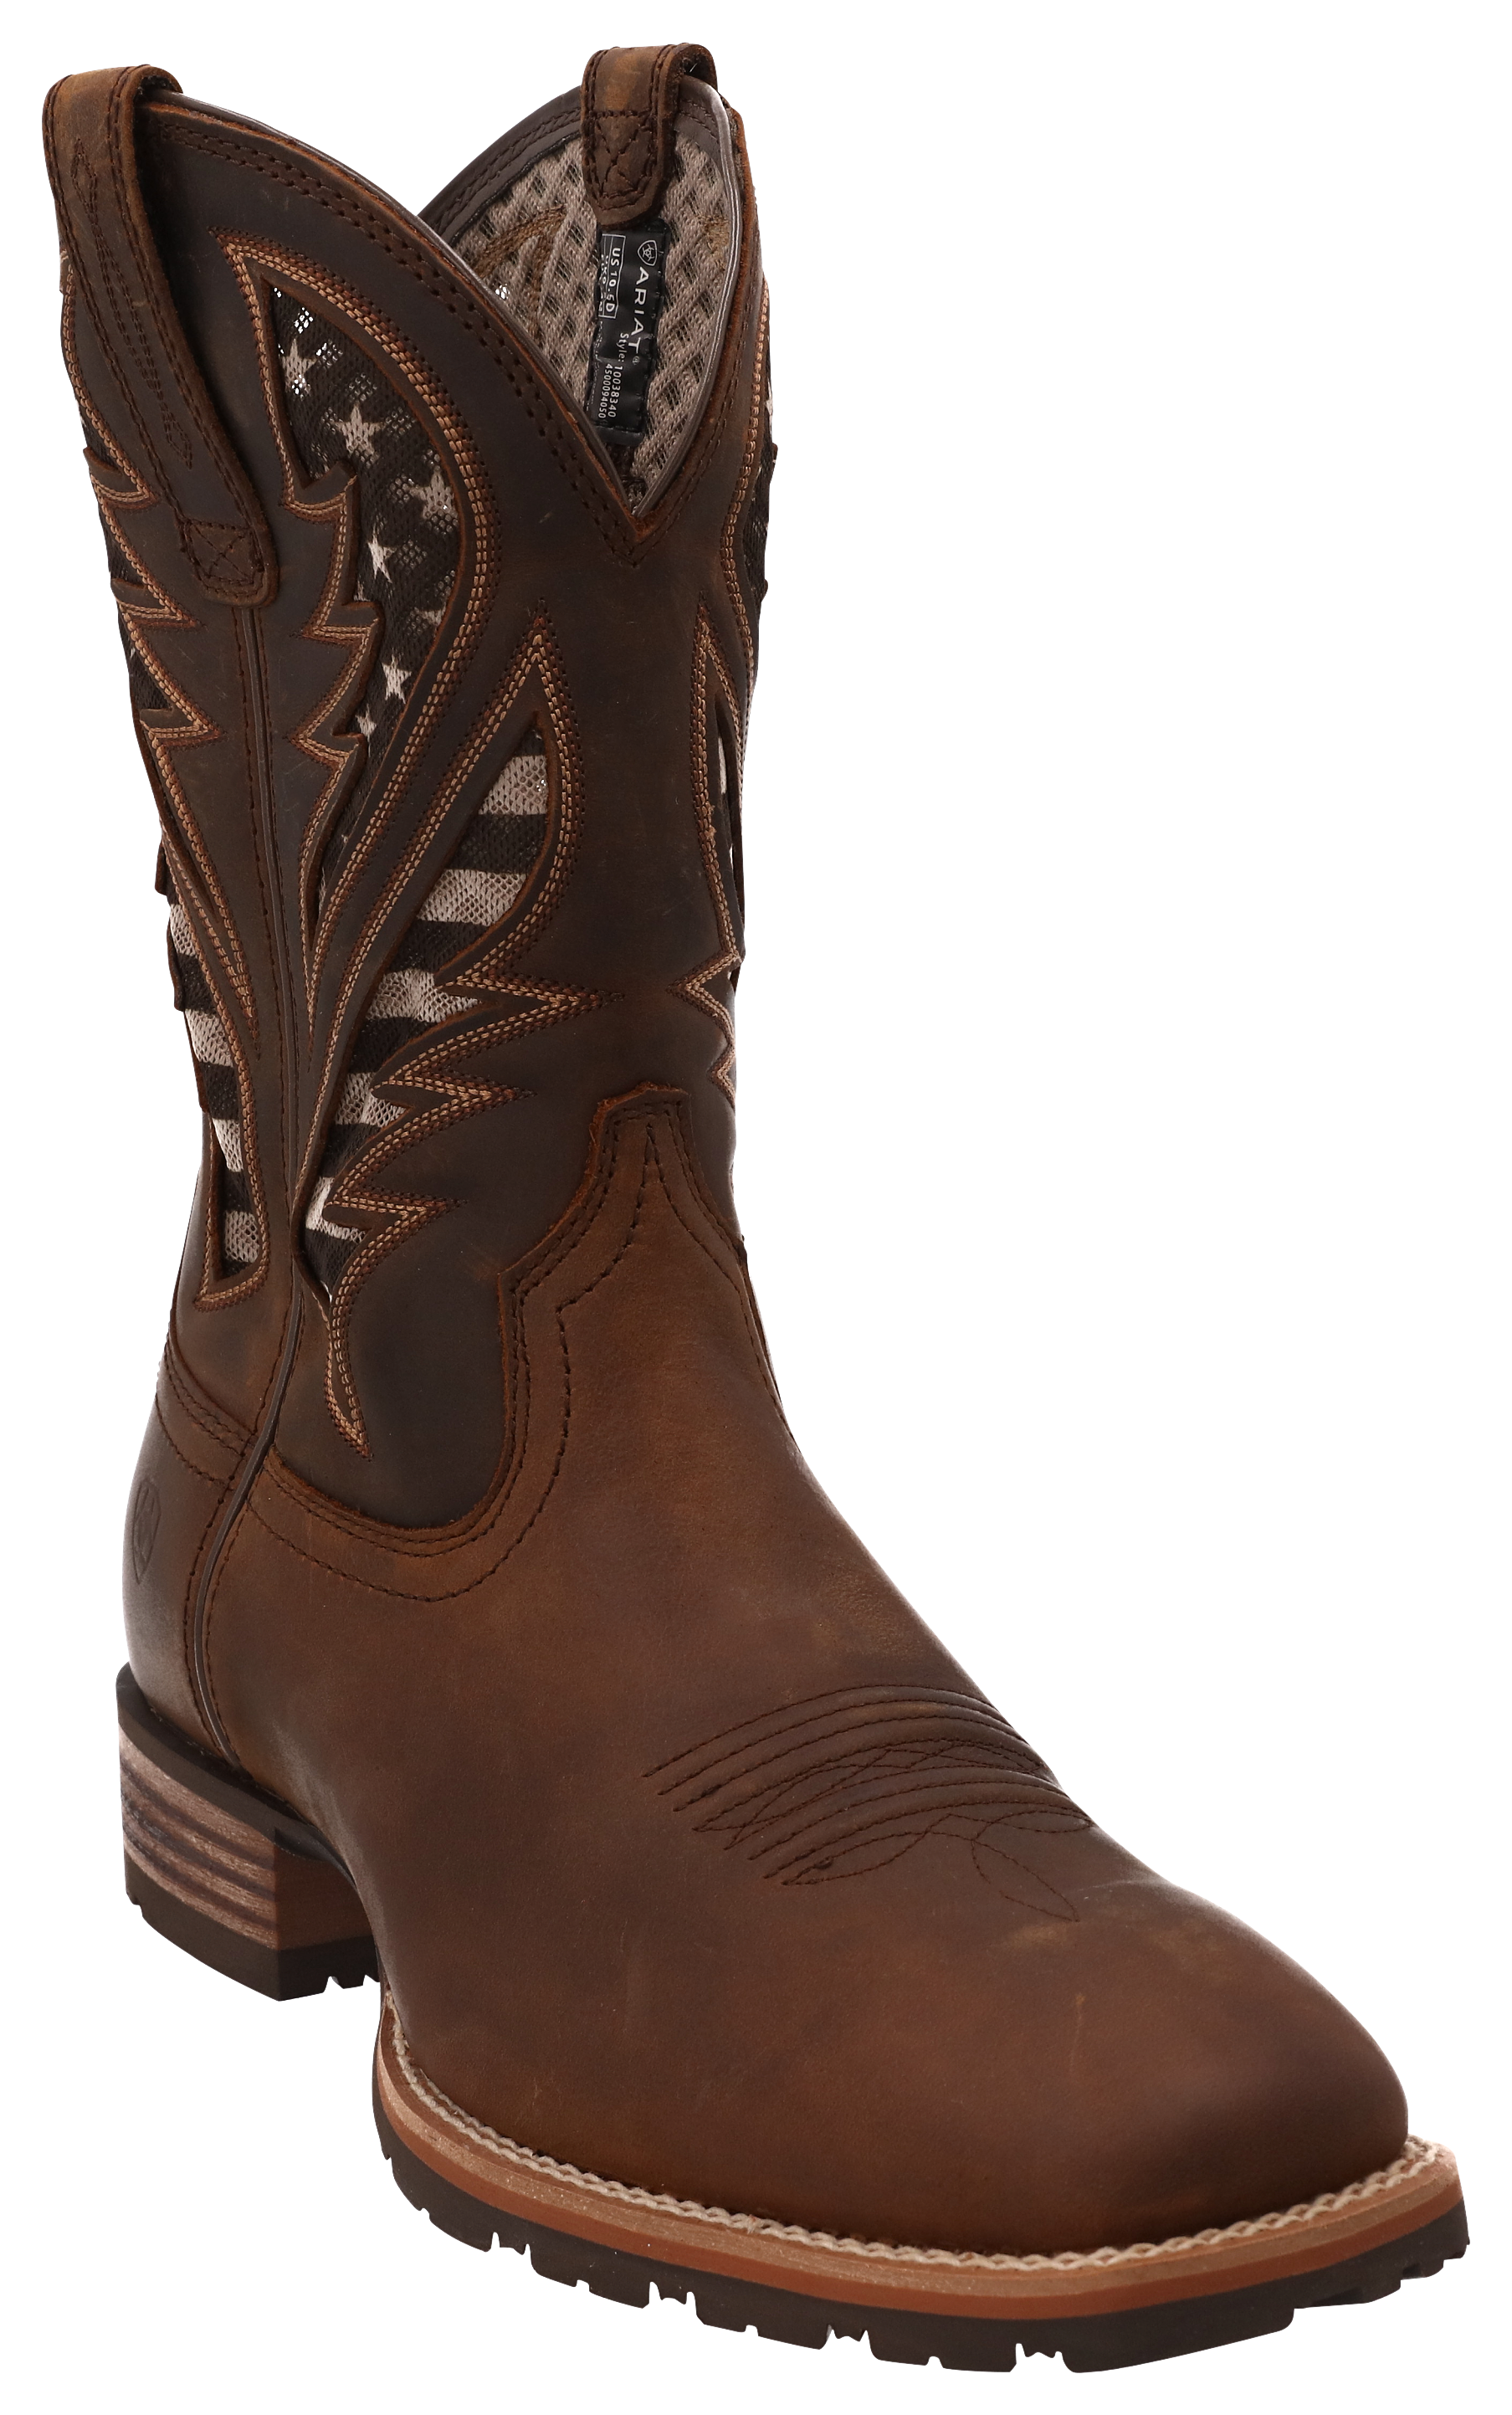 Ariat Men's Distressed Hybrid Rancher Western Performance Boots - Broad  Square Toe